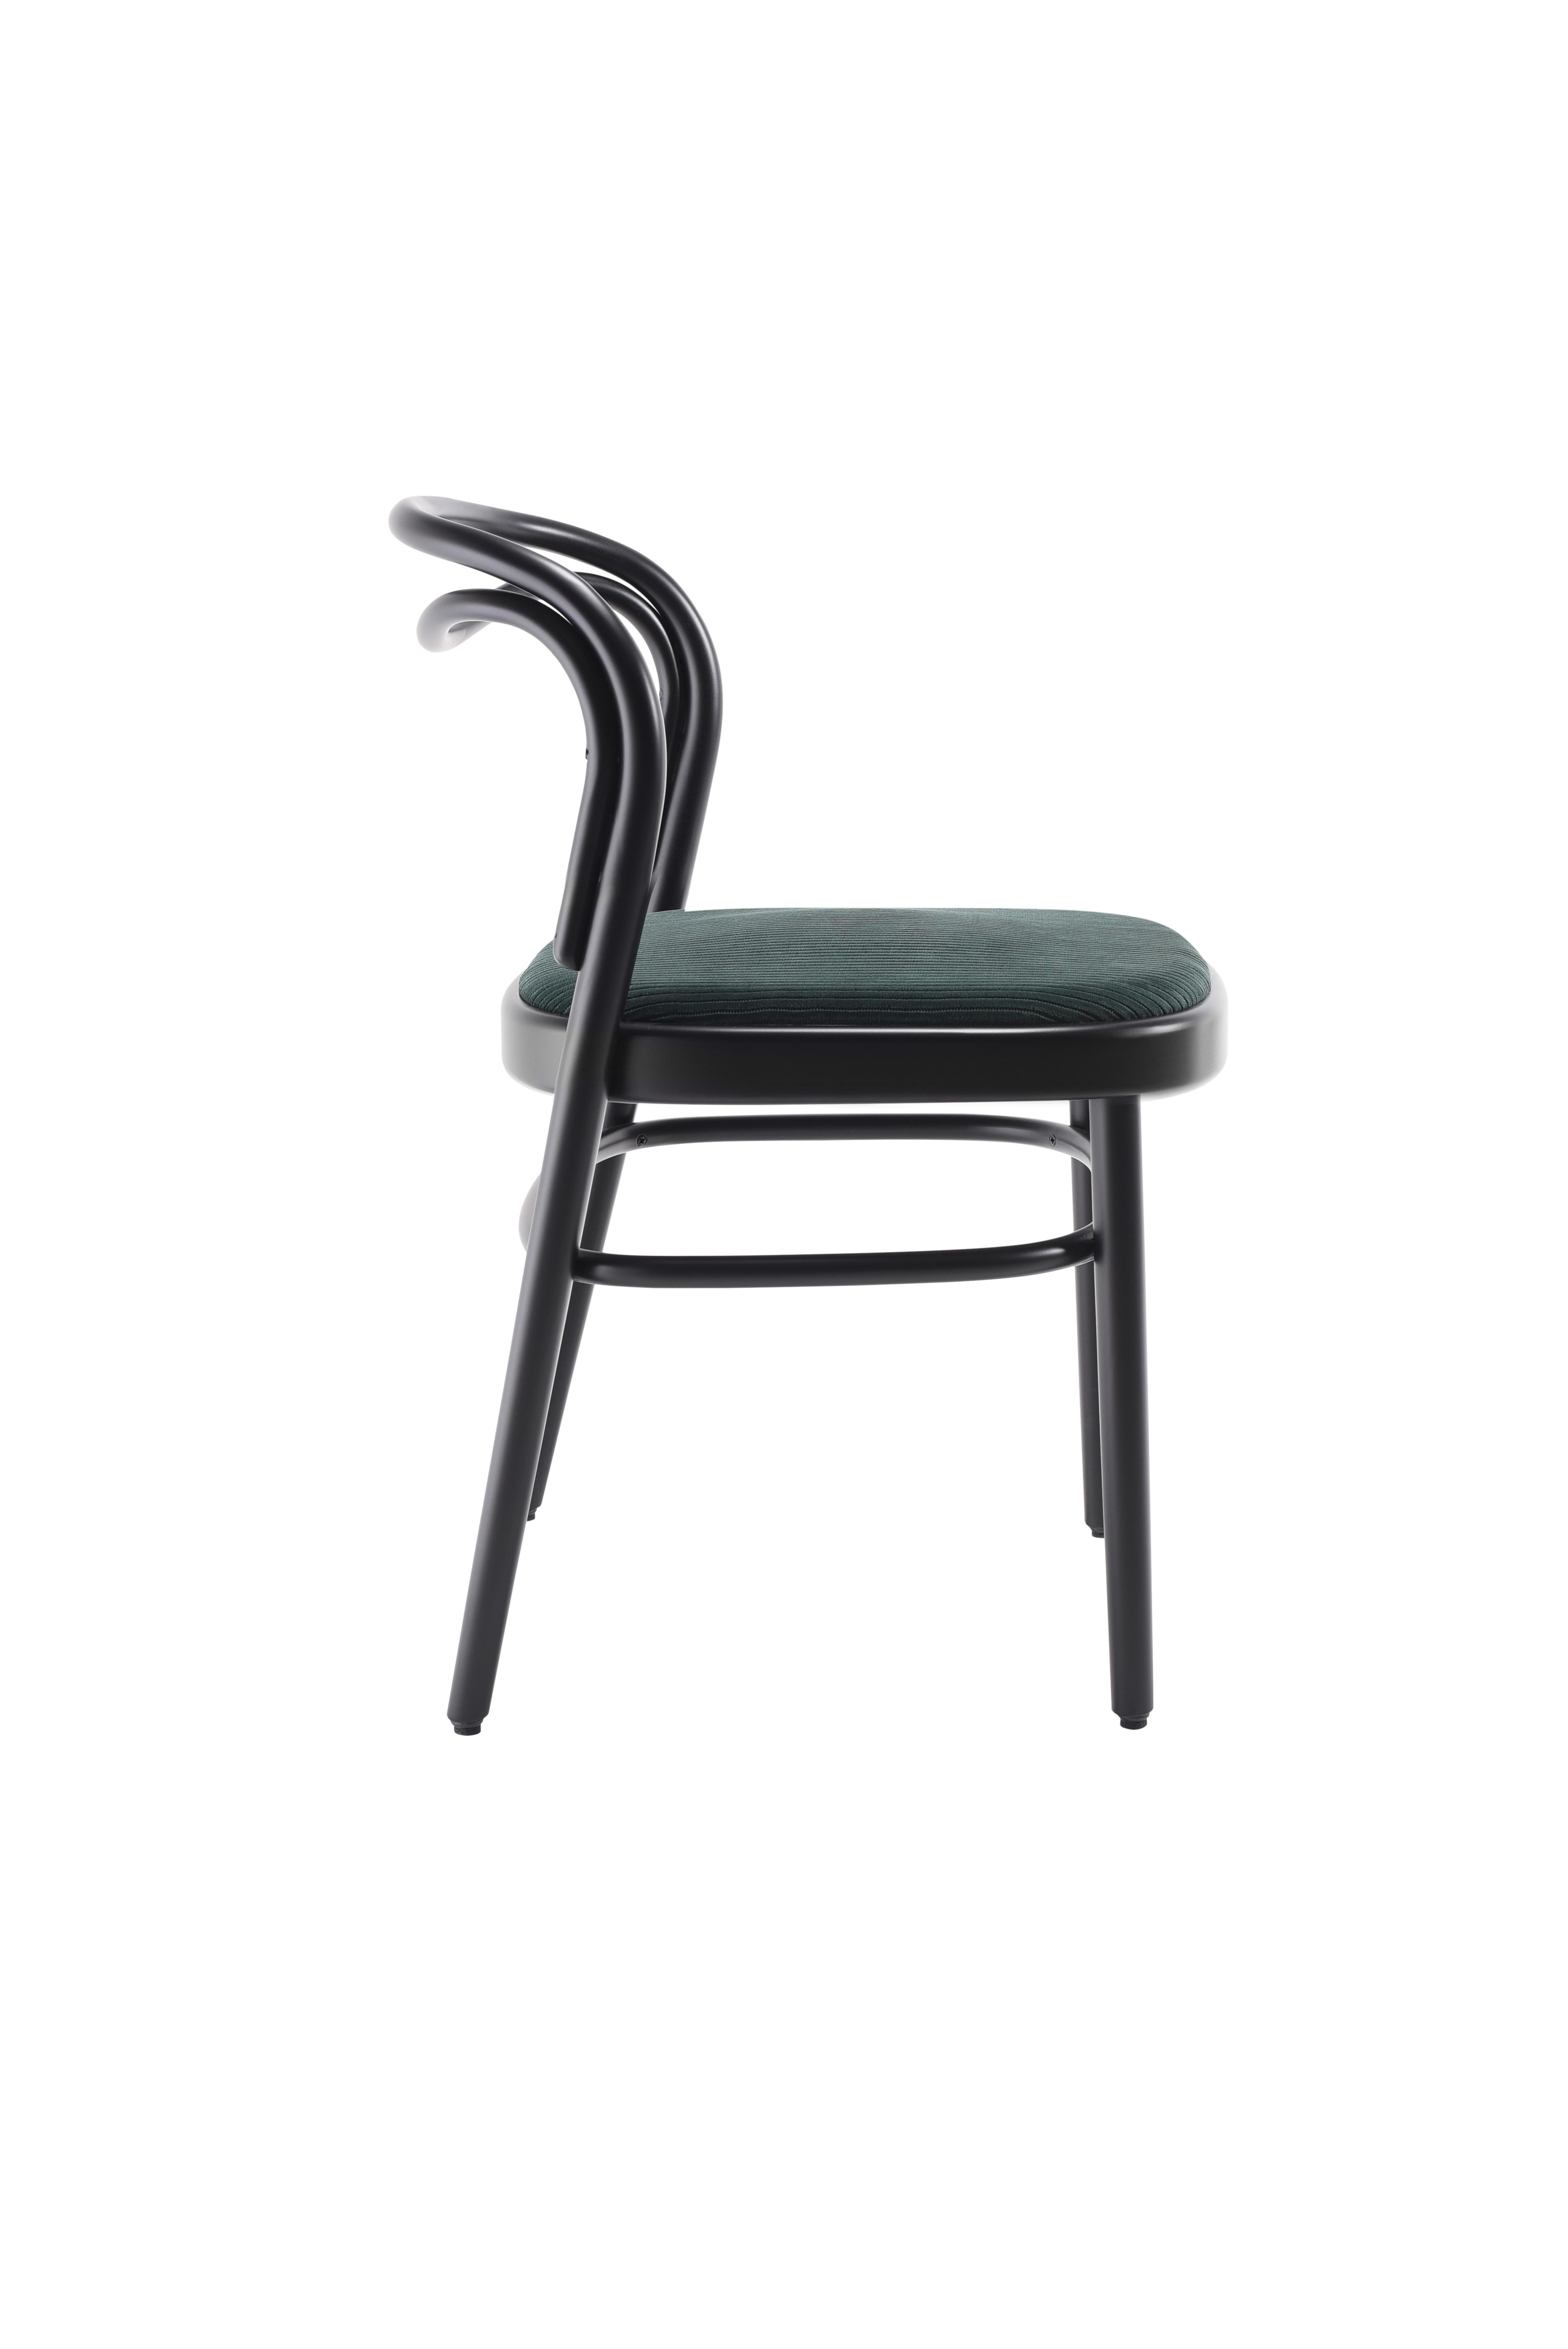 Austrian Gebrüder Thonet Vienna Beaulieu Chair with Upholstered Seat by Philippe Nigro For Sale